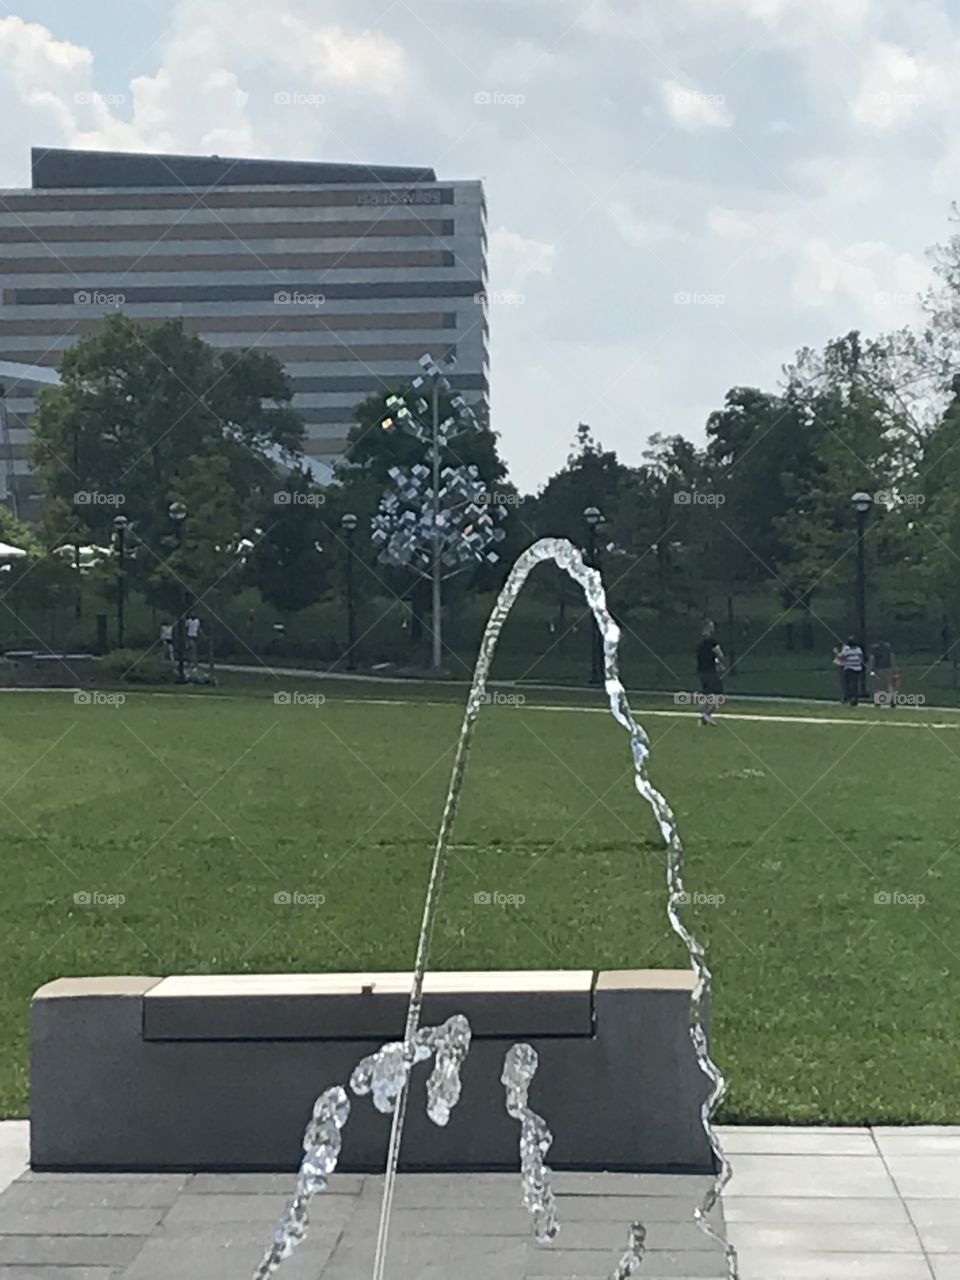 Splash fountains in the science park at our local science museum!